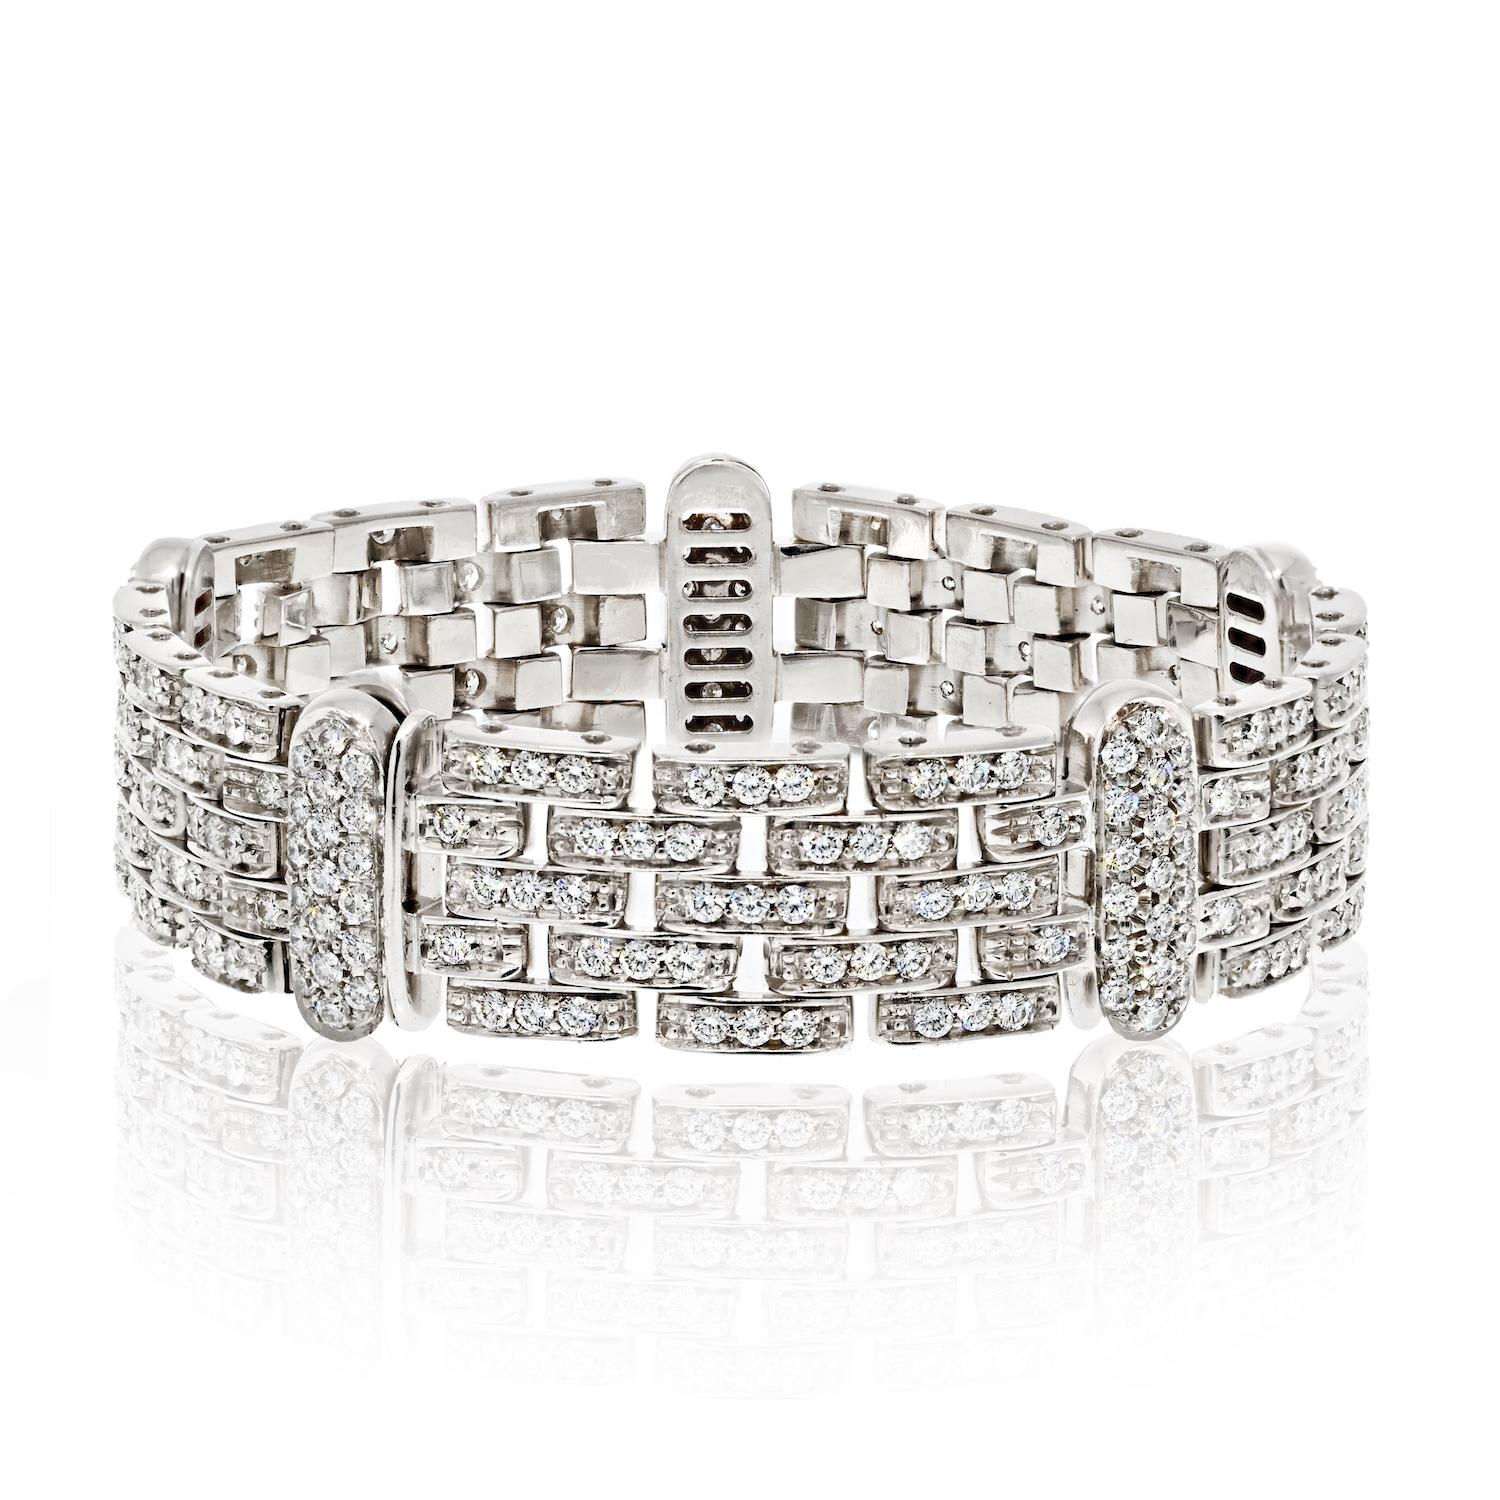 Crafted in lustrous 18K white gold, this exquisite bracelet features five rows of dazzling diamond links, creating a captivating display of brilliance and sparkle.

The bracelet is adorned with a total carat weight of 10.00cttw, showcasing a